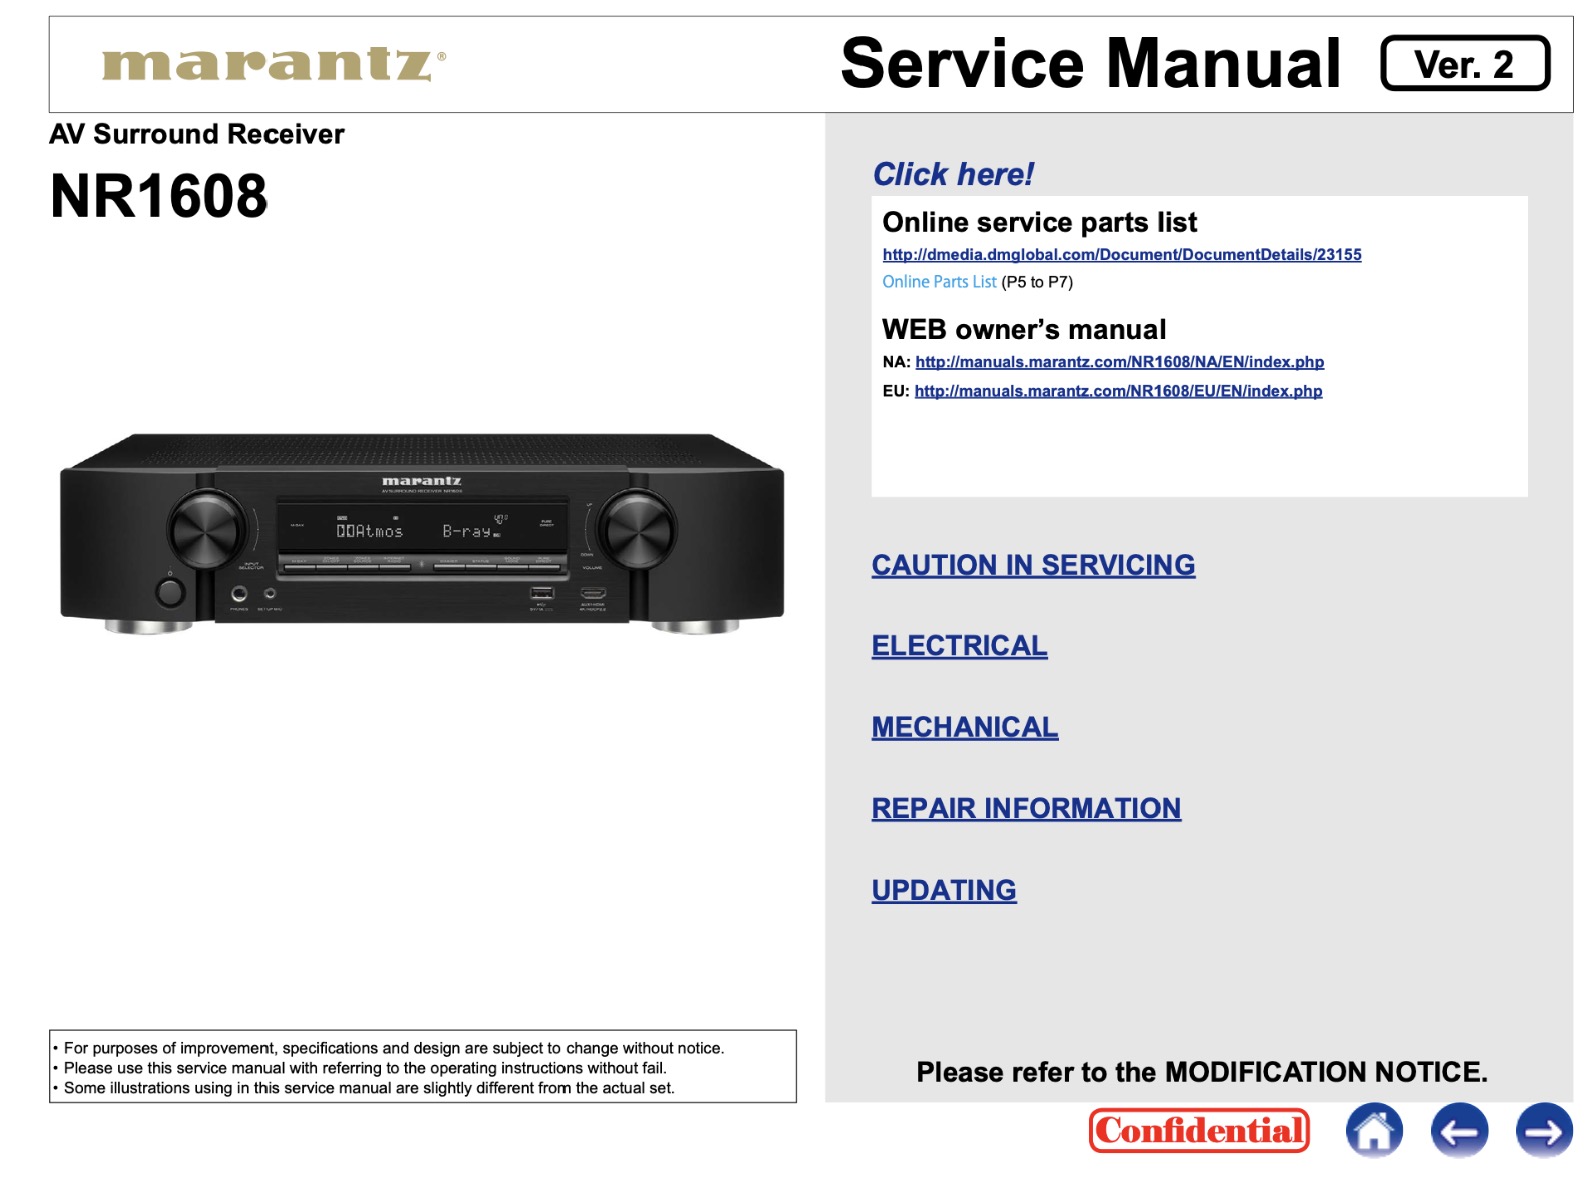 Marantz NR1608 AV Surround Receiver Service Manual, Parts List, Exploded View, Wiring and Schematic Diagram